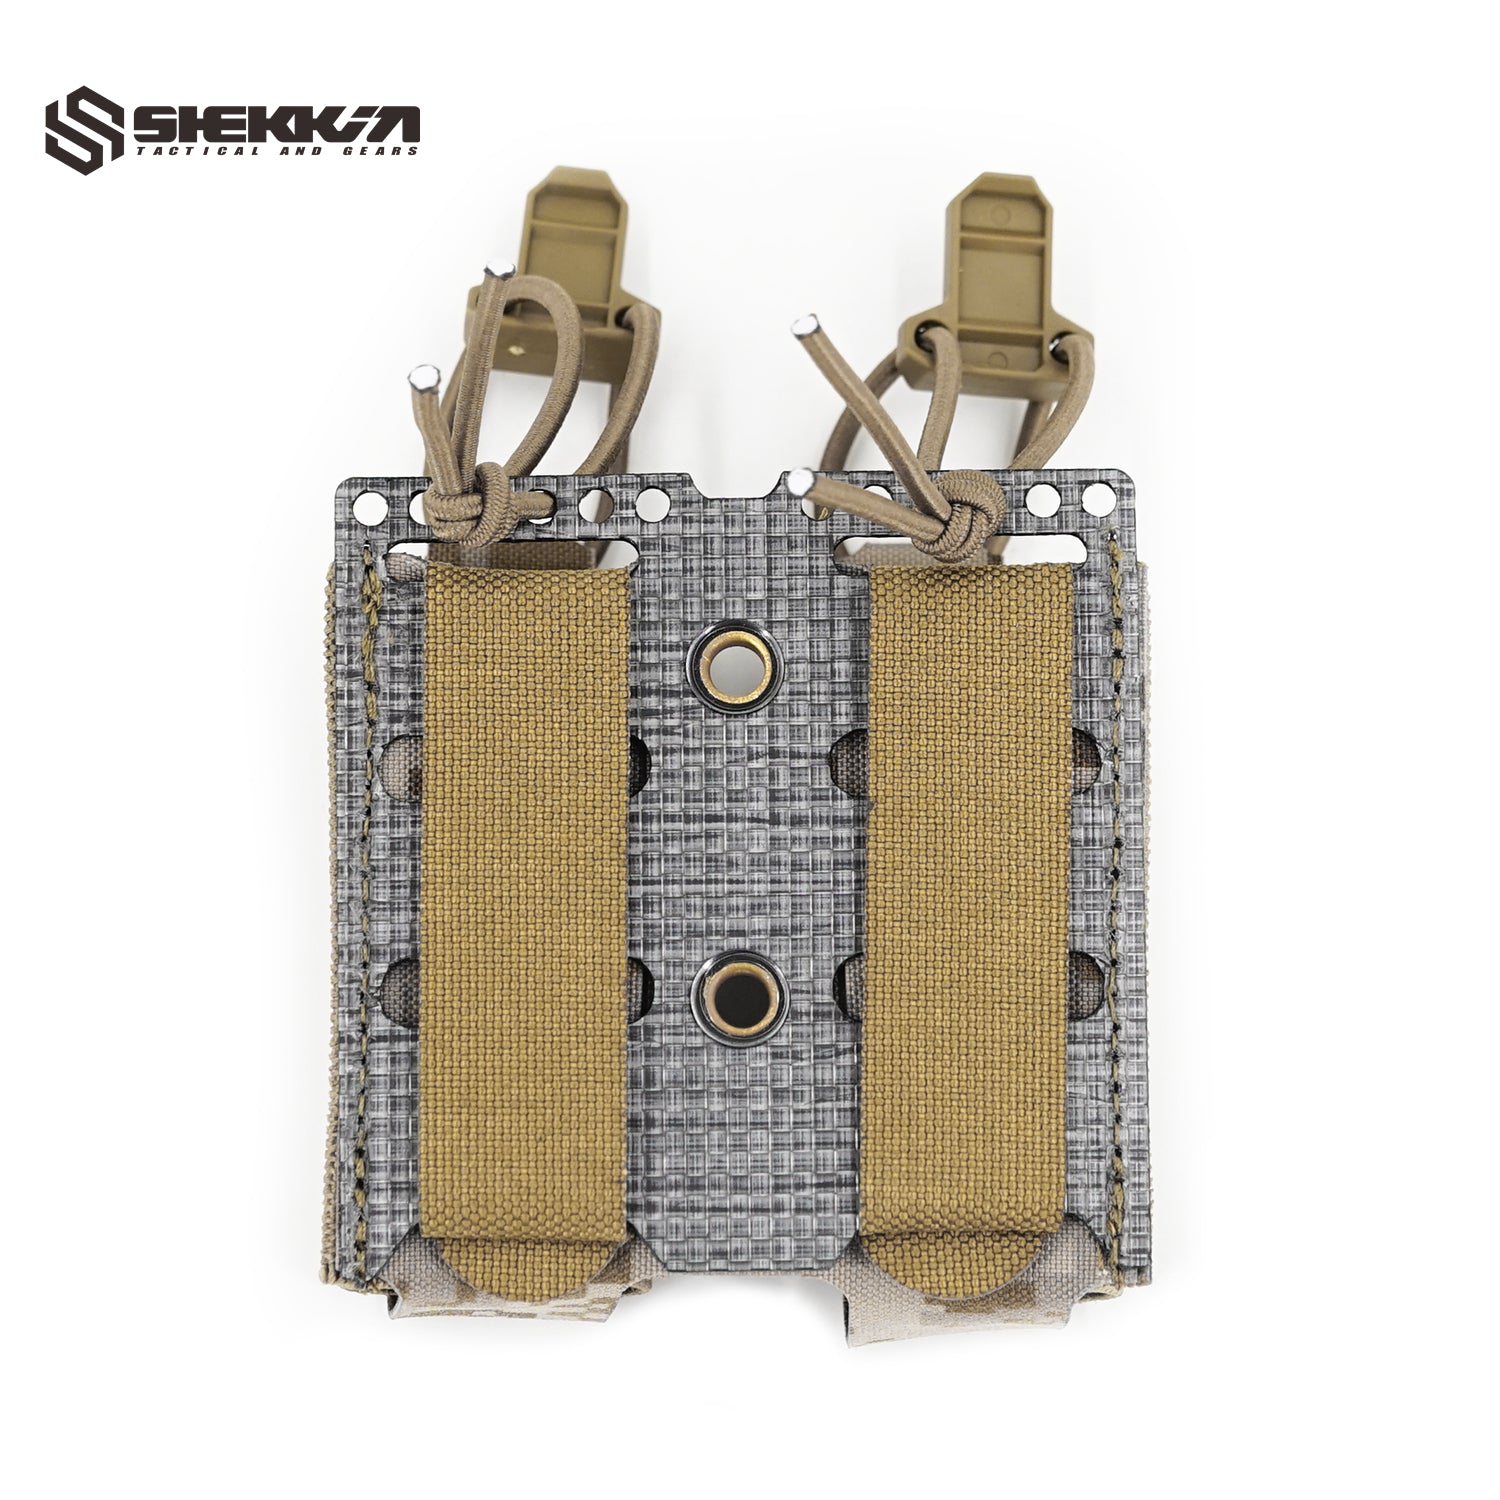 Double 9mm mag pouch with Tegris plate - Shekkin Gears